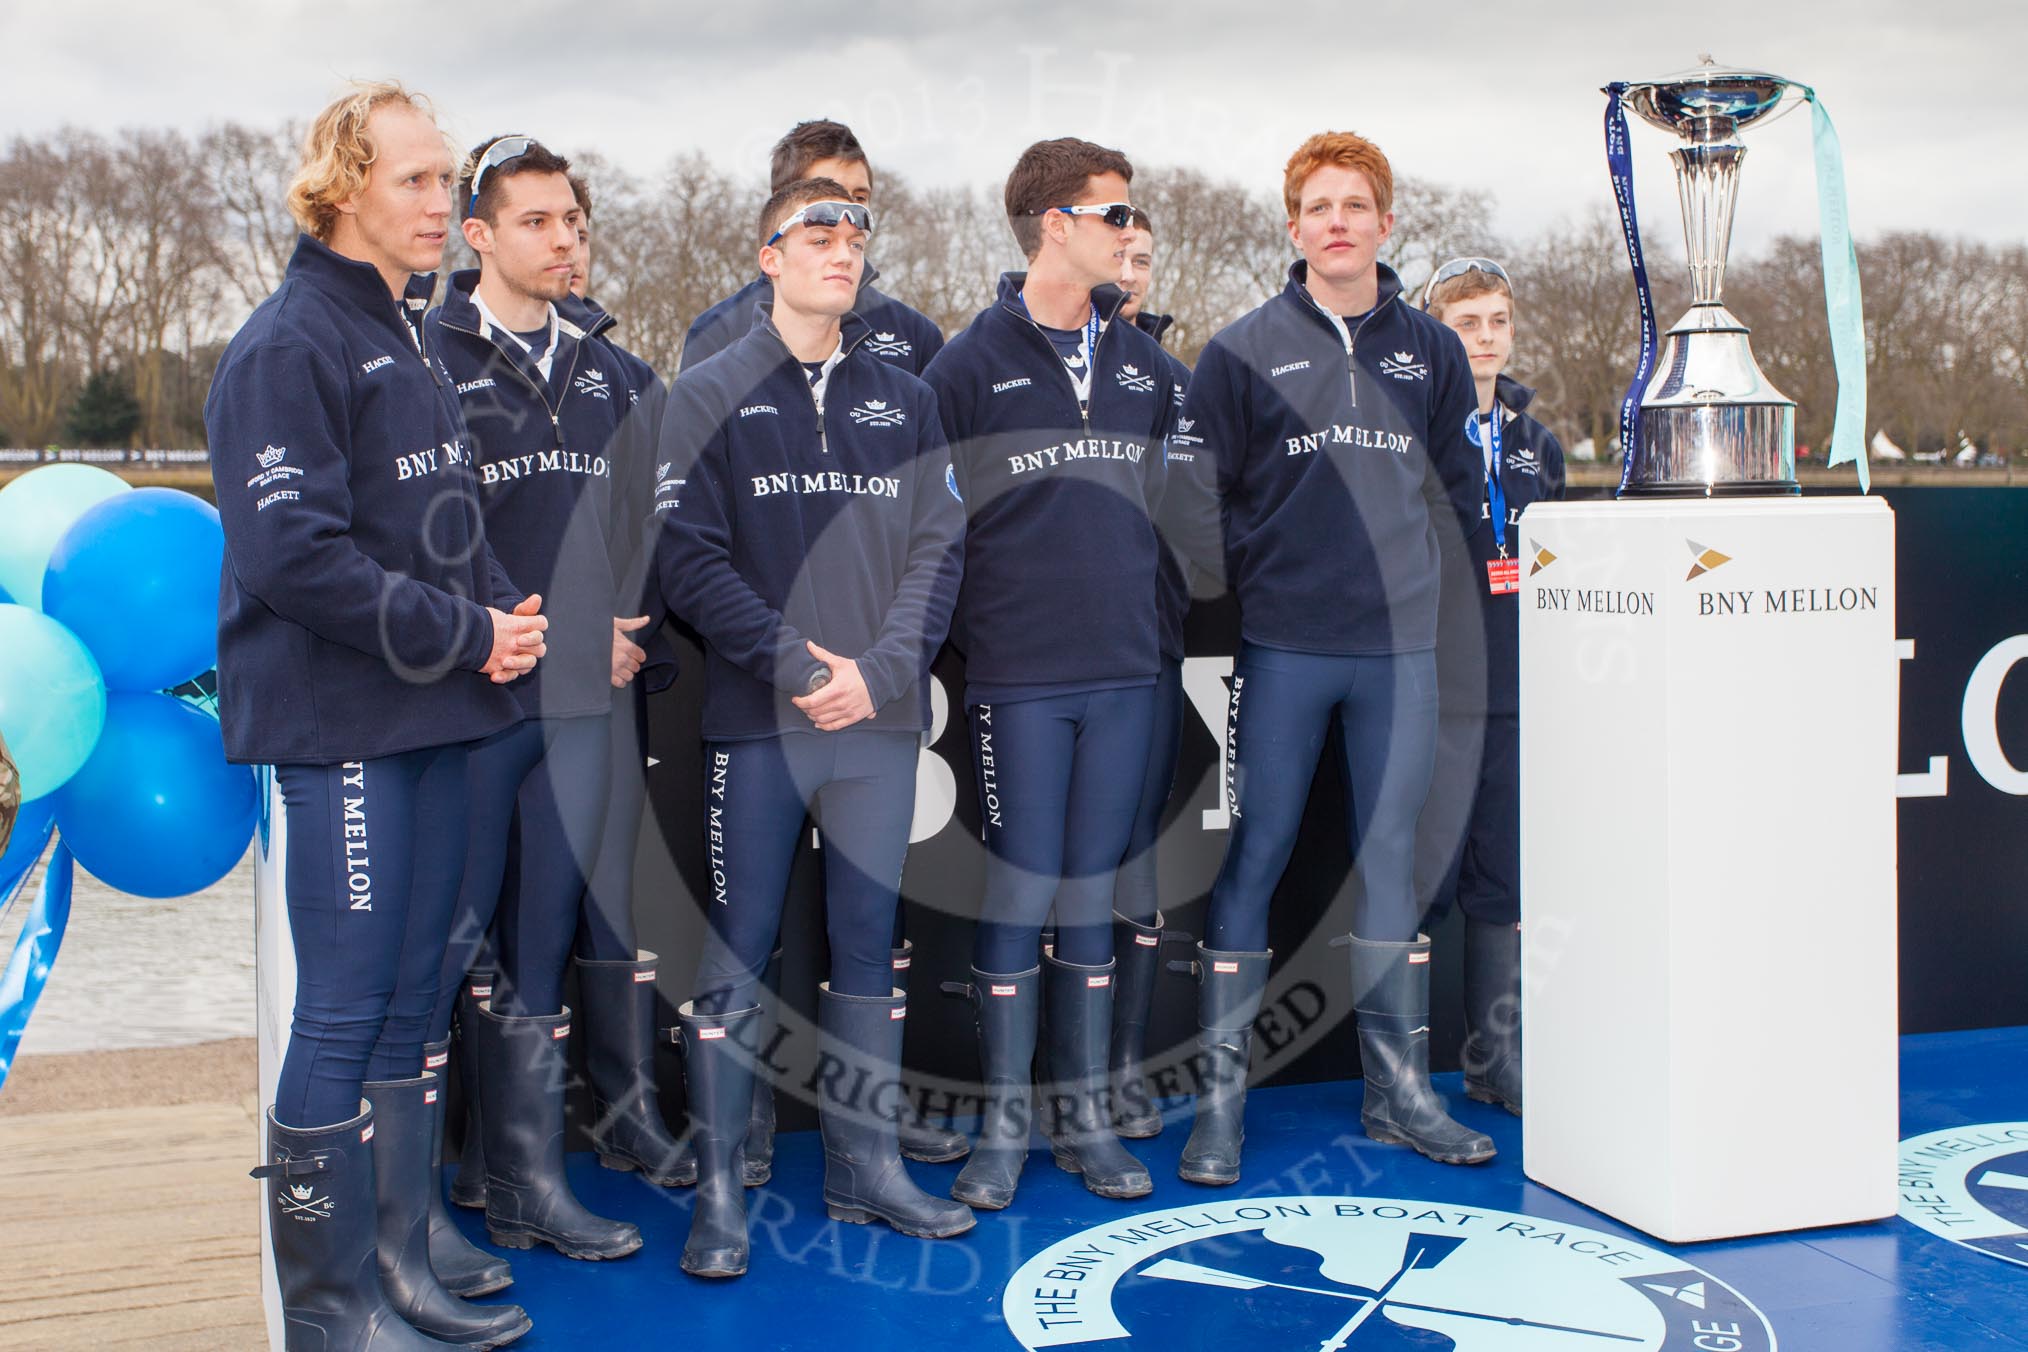 The Boat Race 2013: The crew of the Oxford reserve boat Isis before the toss for stations - 7 seat Rev'd James Stephenson, 4 William Zeng, 3 Dr Alexander Woods, stroke Thomas Watson, 2 Nicholas Hazell, 6 Benjamin French, bow Iain Mandale, 5 Joseph Dawson and cox Laurence Harvey..
Putney,
London SW15,

United Kingdom,
on 31 March 2013 at 14:33, image #81